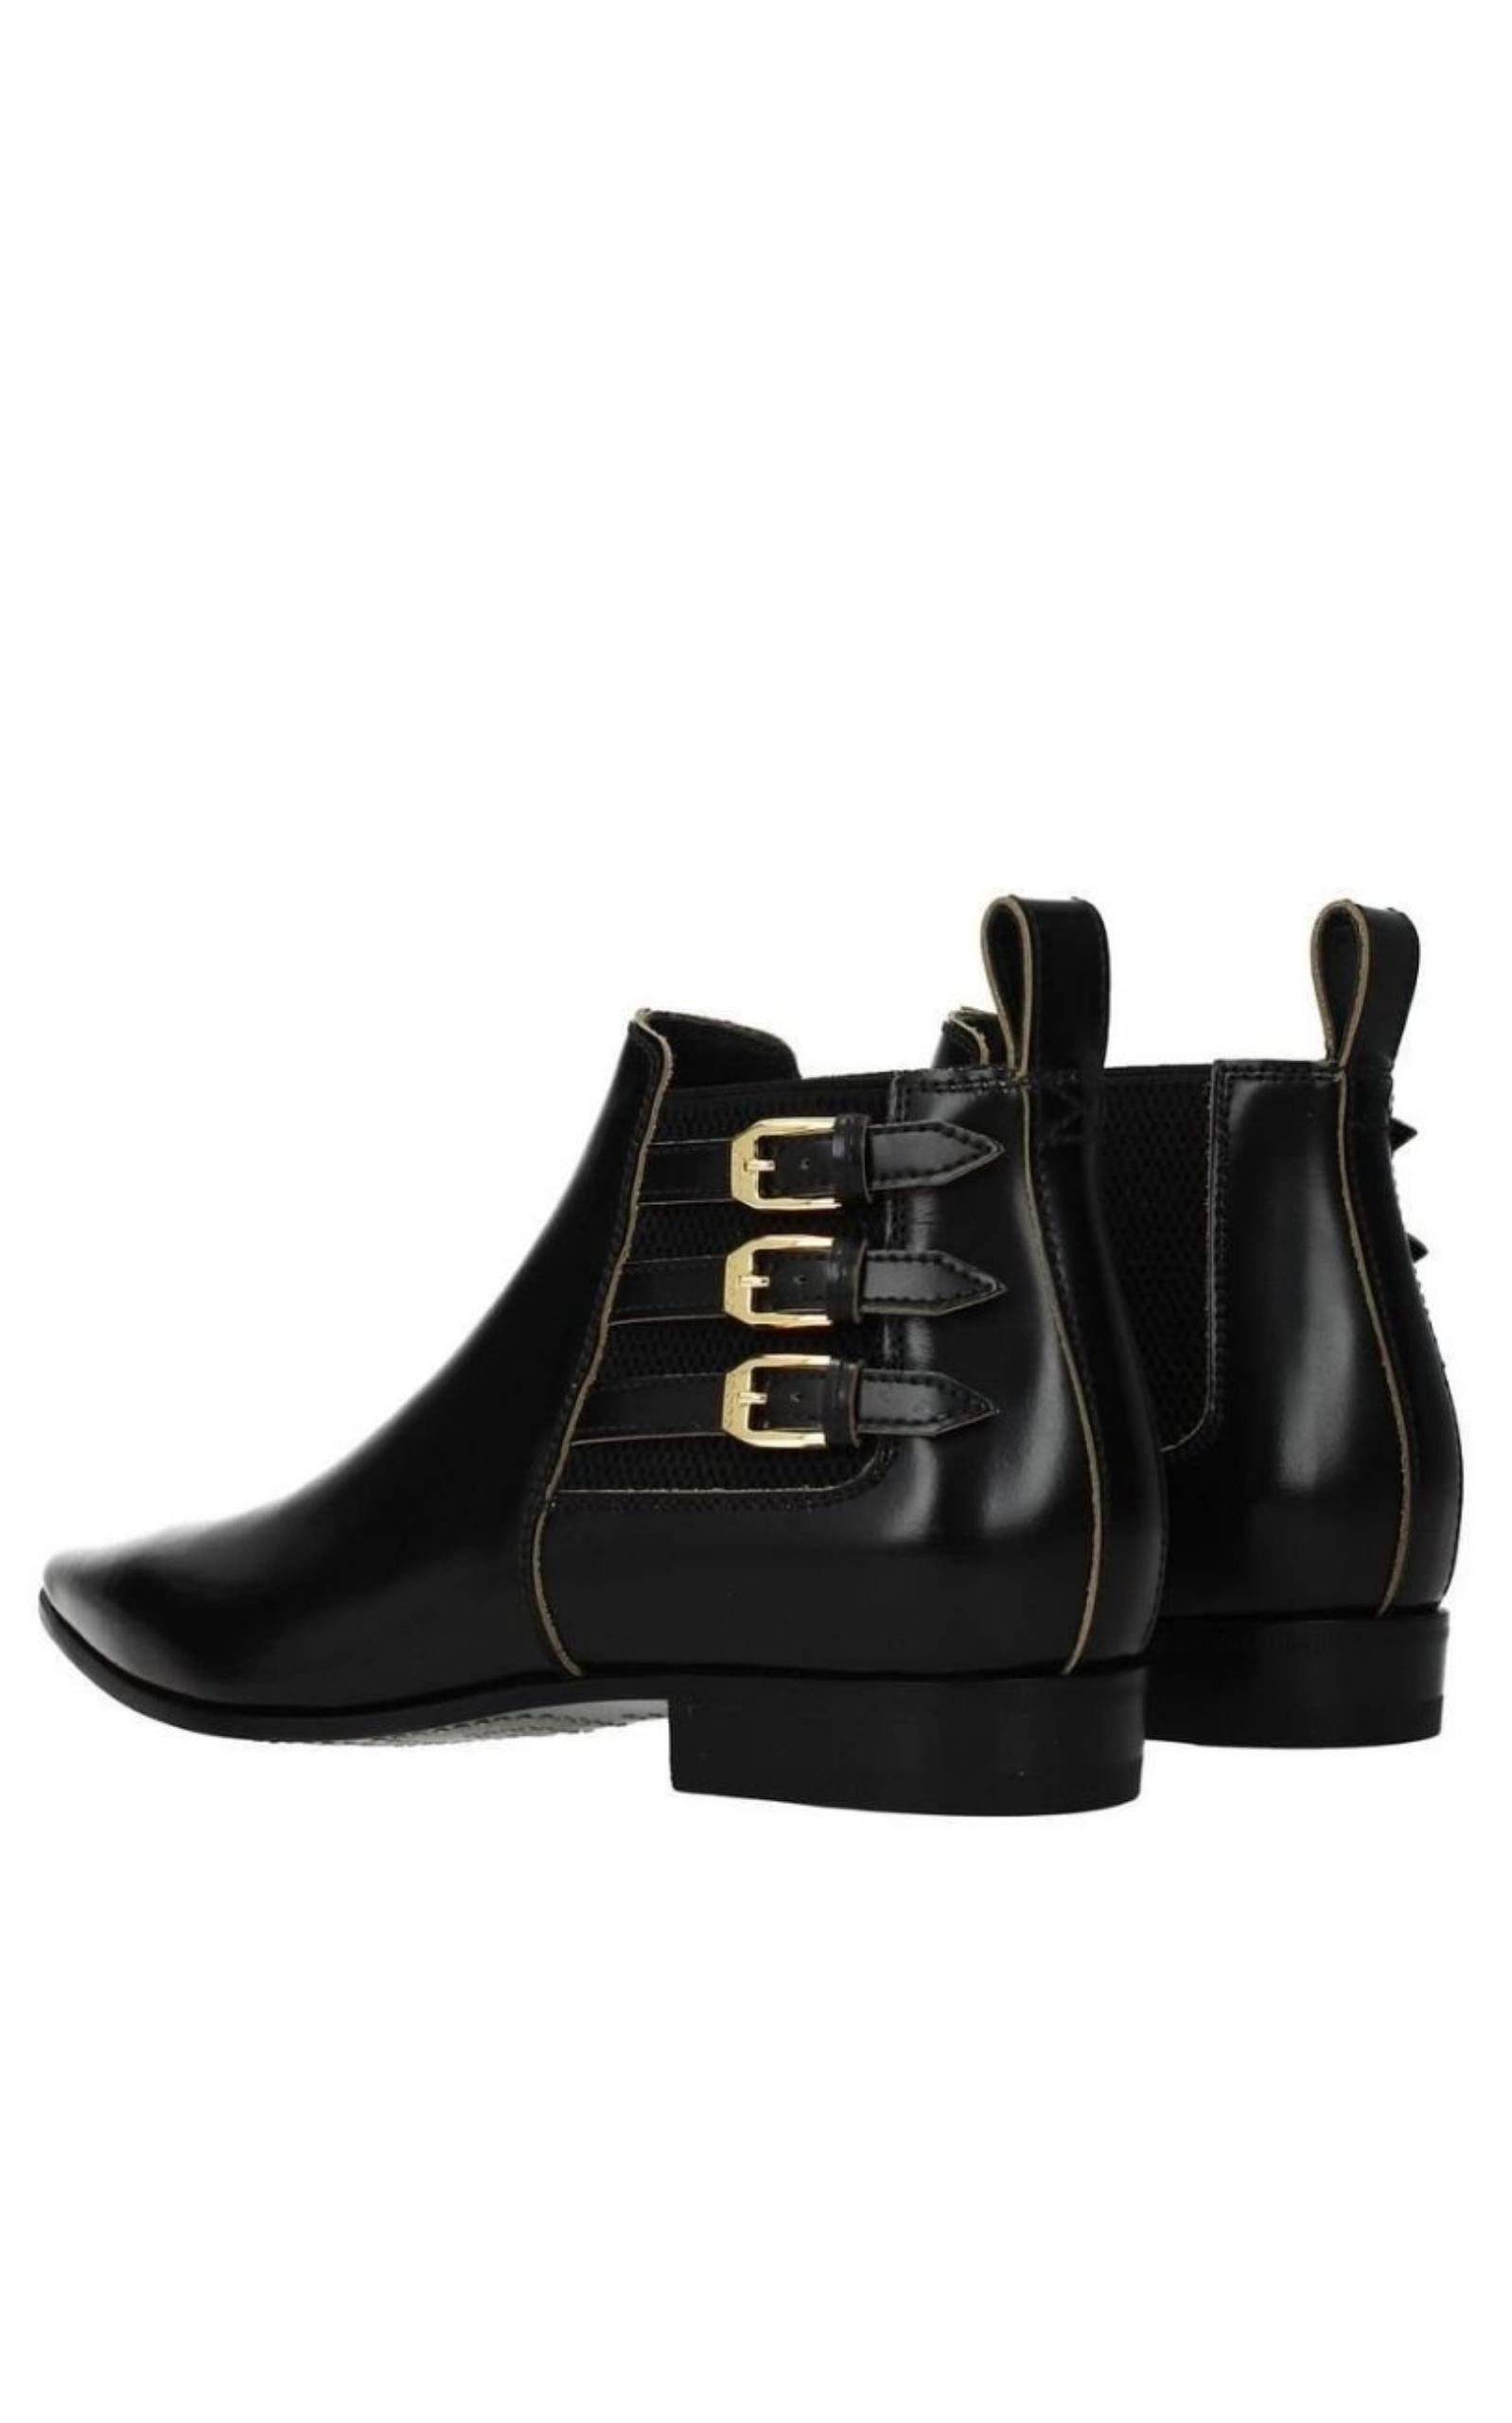 Gucci Cutout Leather Ankle Boots